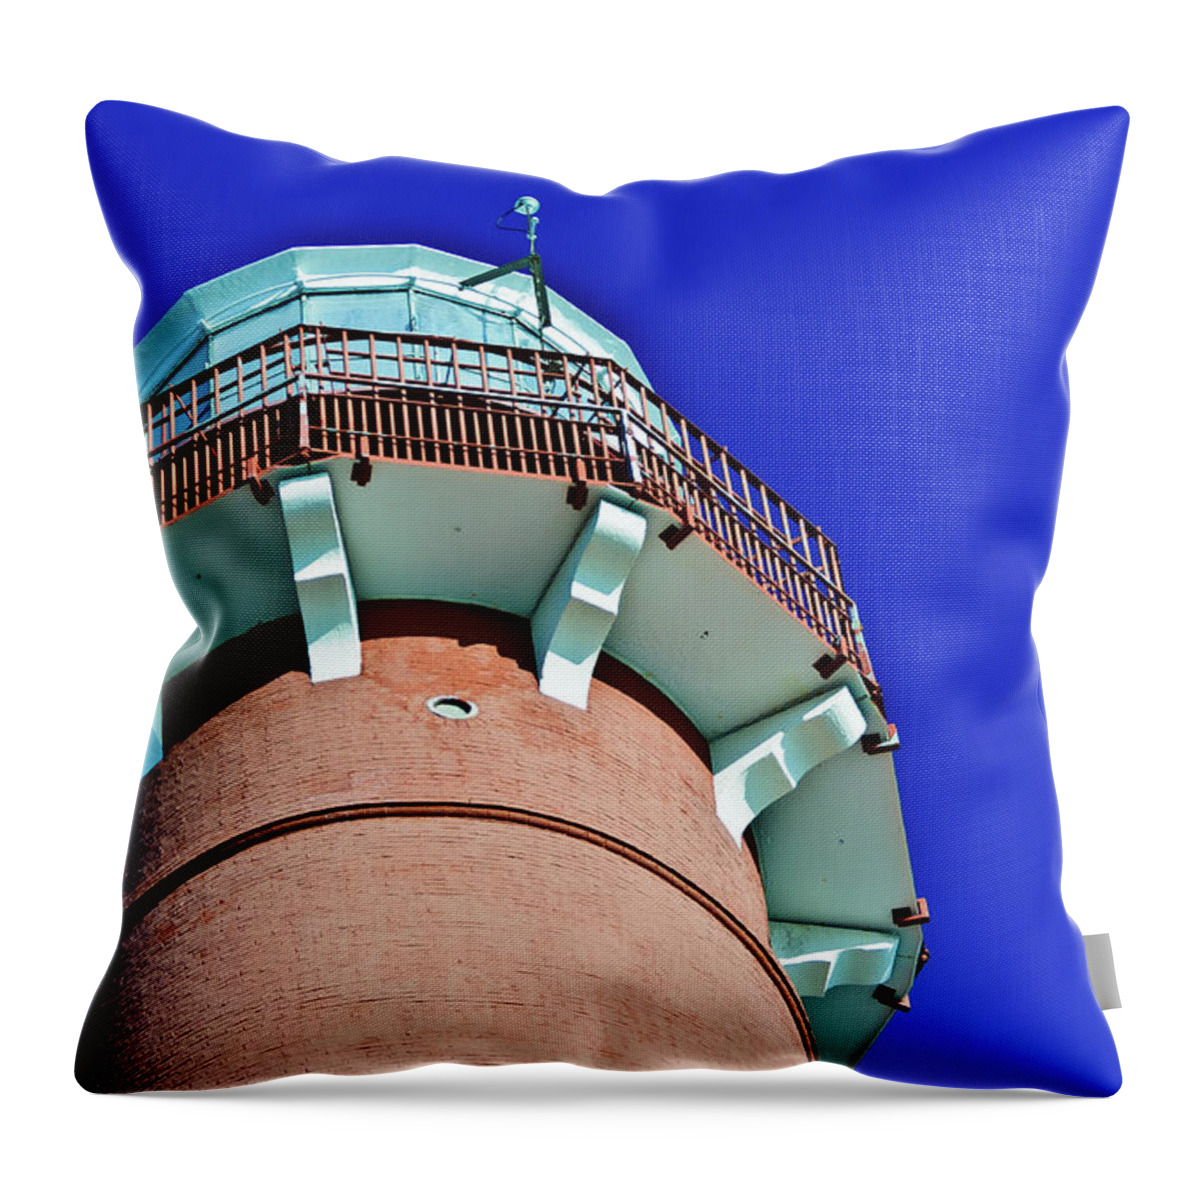 Barnegat Light Throw Pillow featuring the photograph Barnegat Lighthouse Top by Louis Dallara